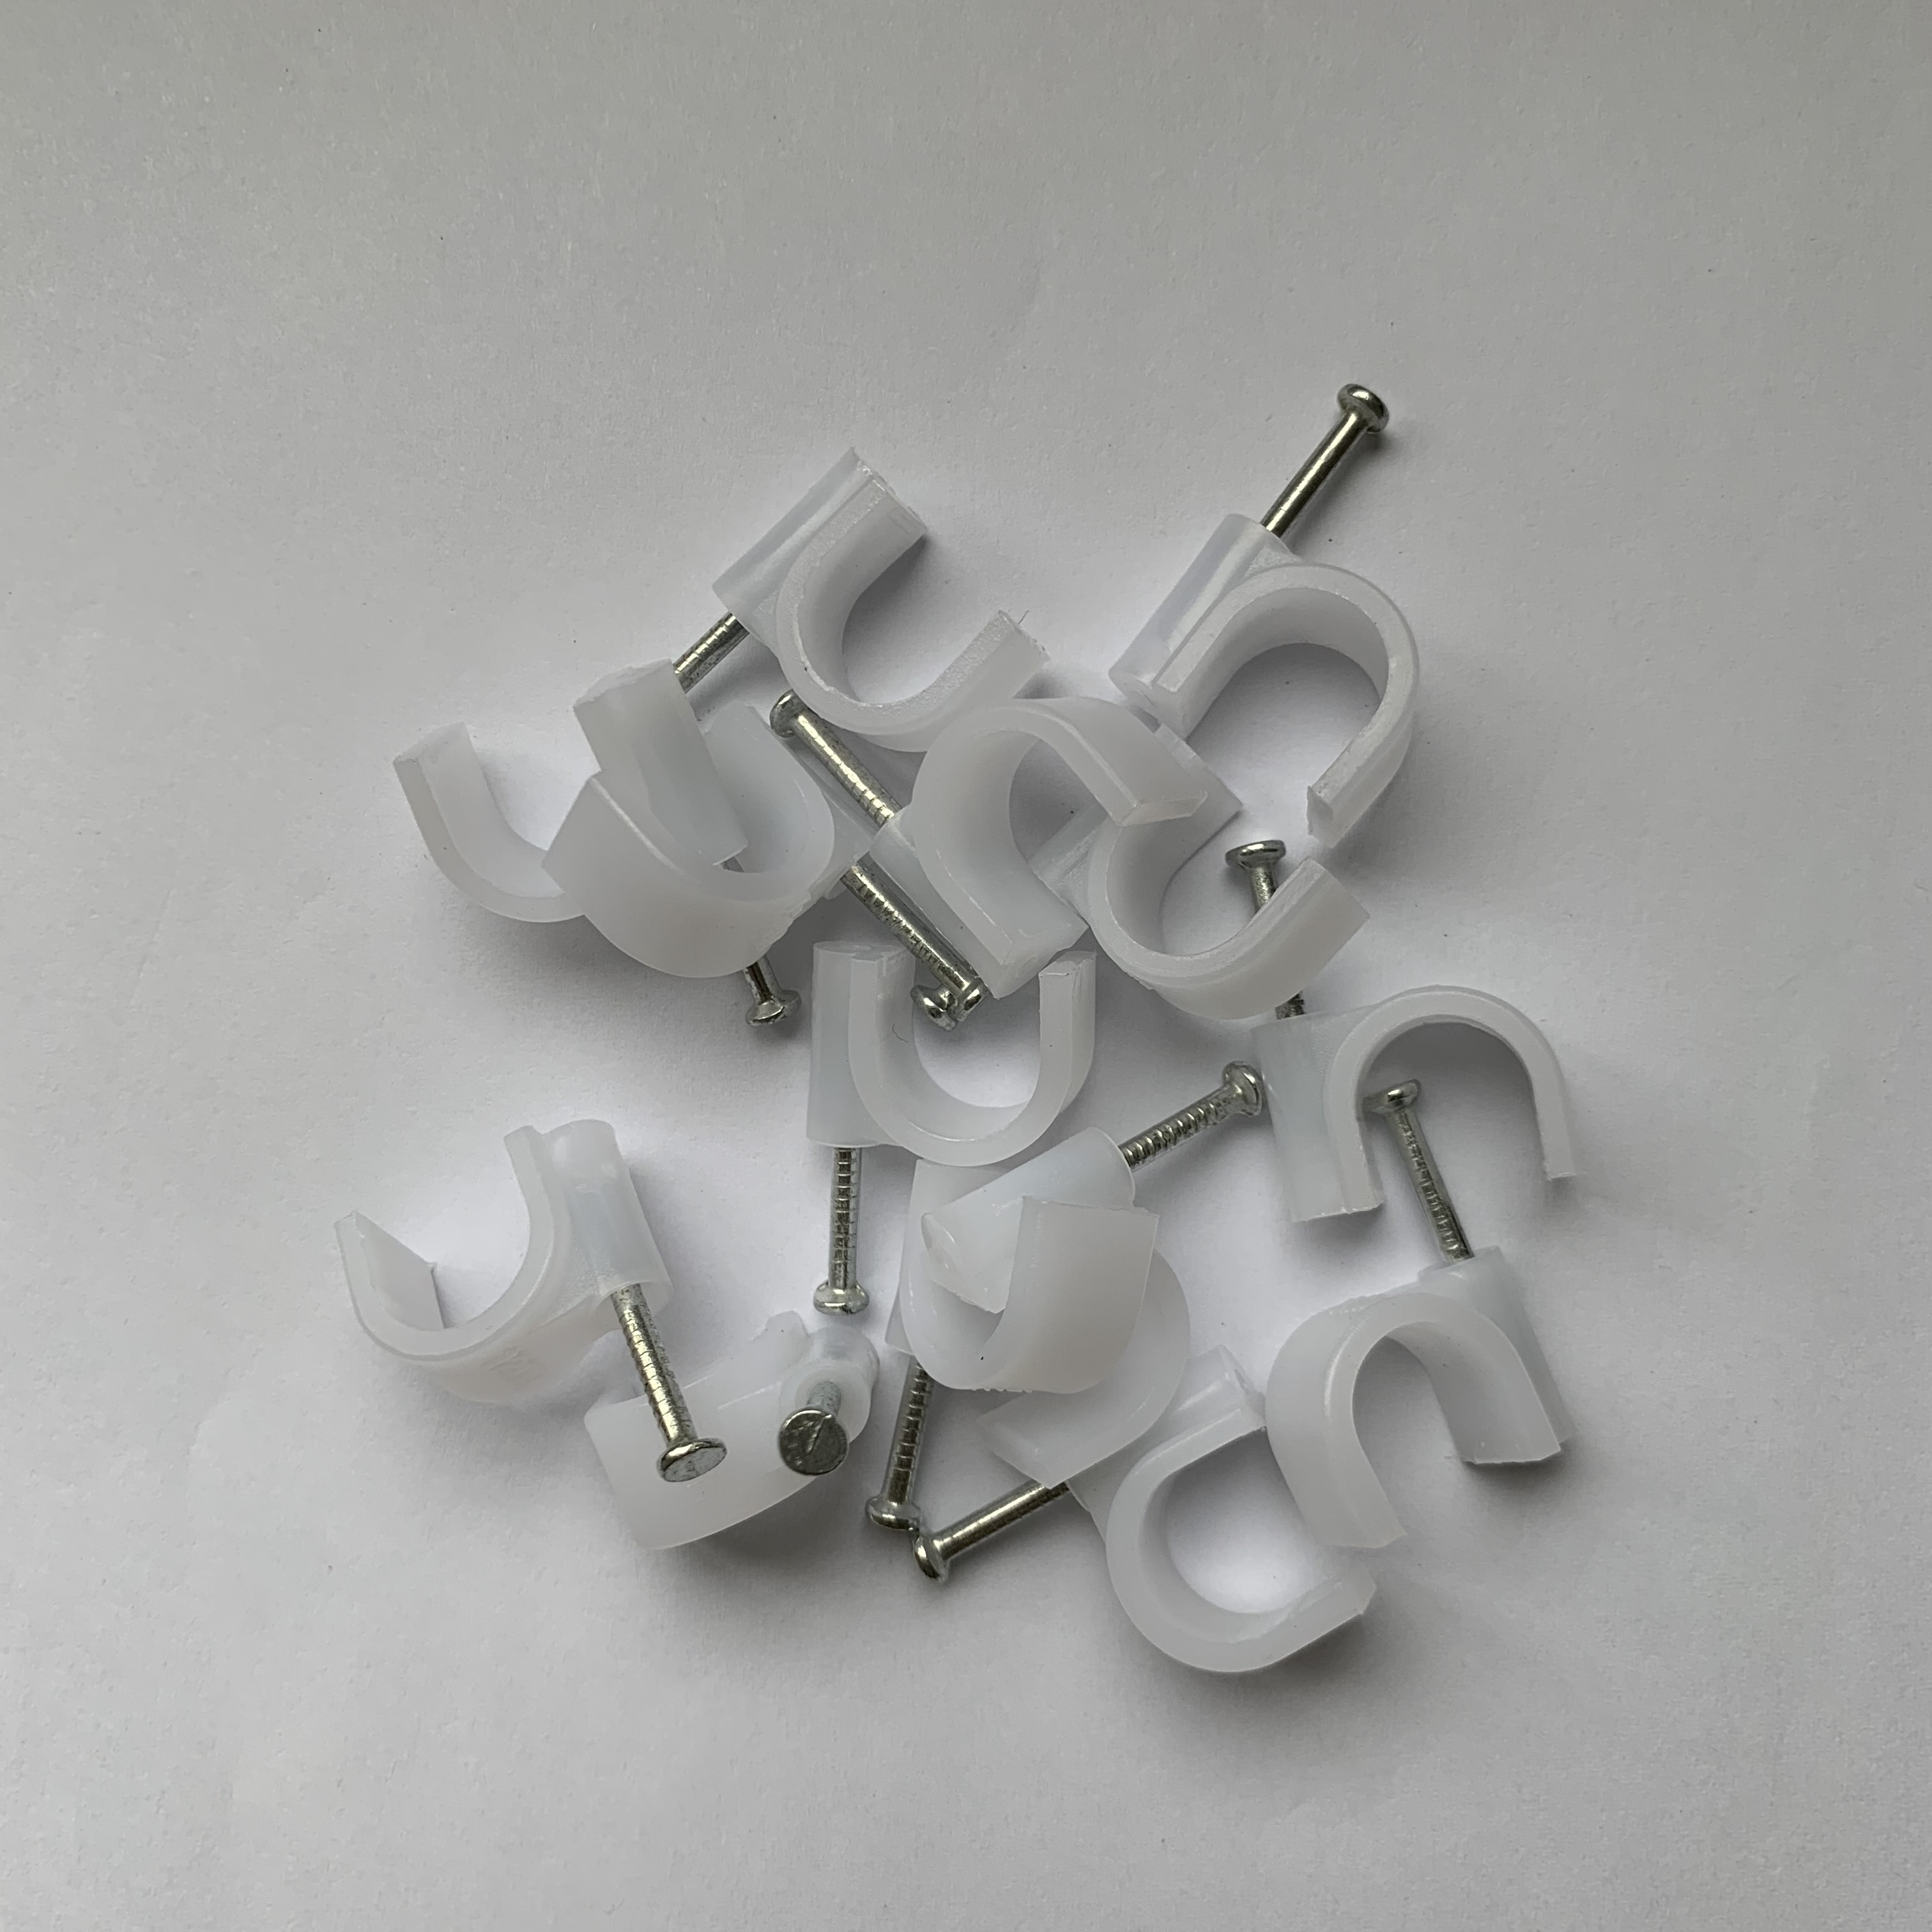 50pcs round clamp 18mm 20mm fixed nail clamp plastic clamp power clamp